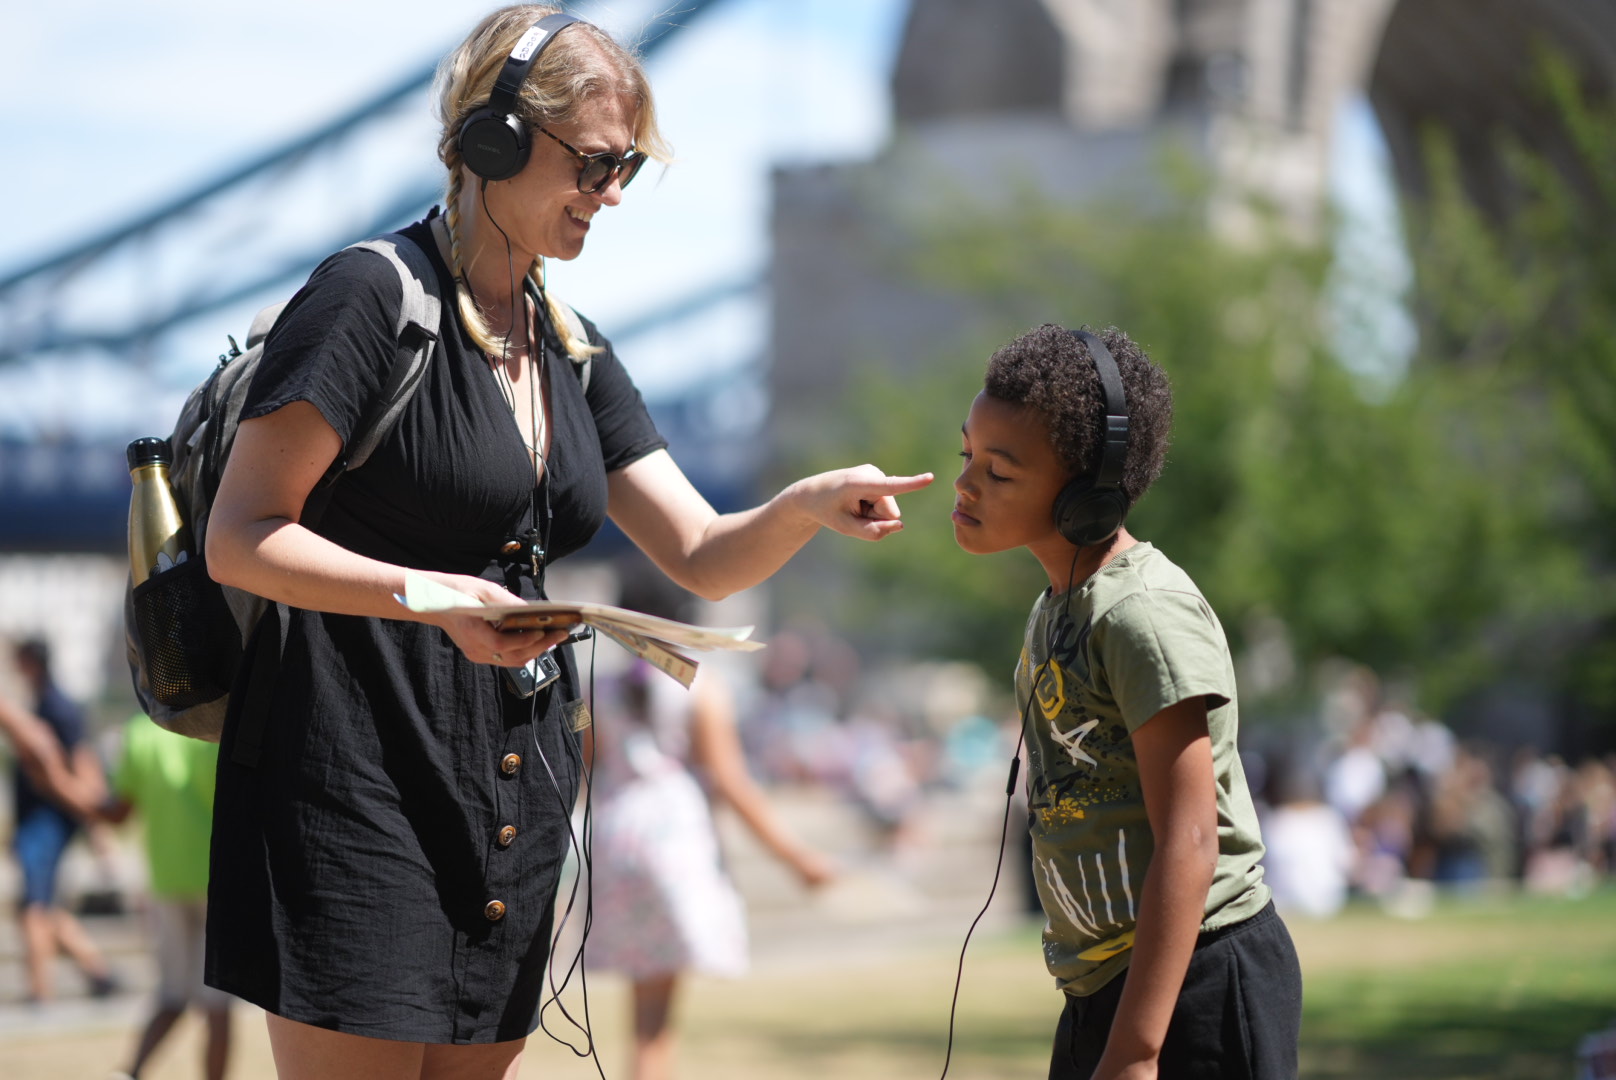 MidSummerland. A woman and a child wearing headphones. The woman is pointing at the child's face